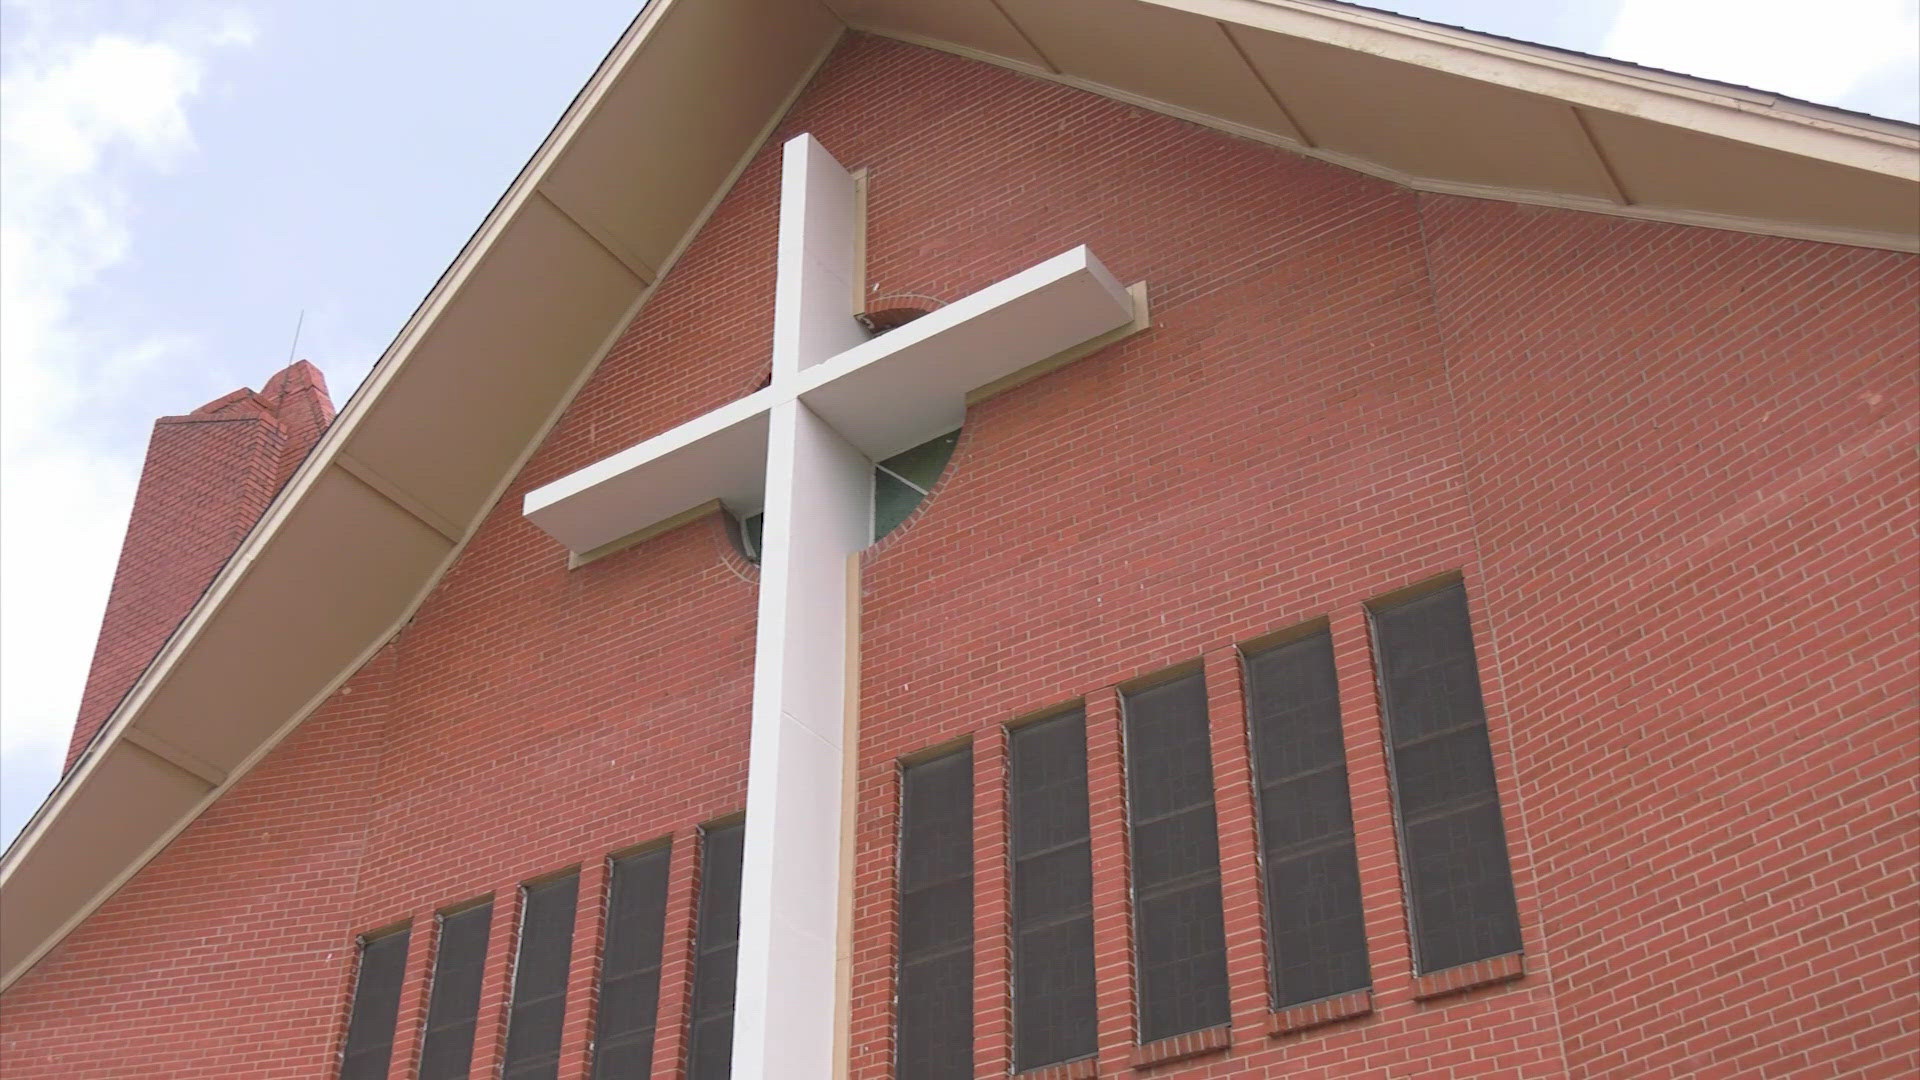 The 137-year-old church is the 4th oldest AME church in Houston and the first established in the Fifth Ward.